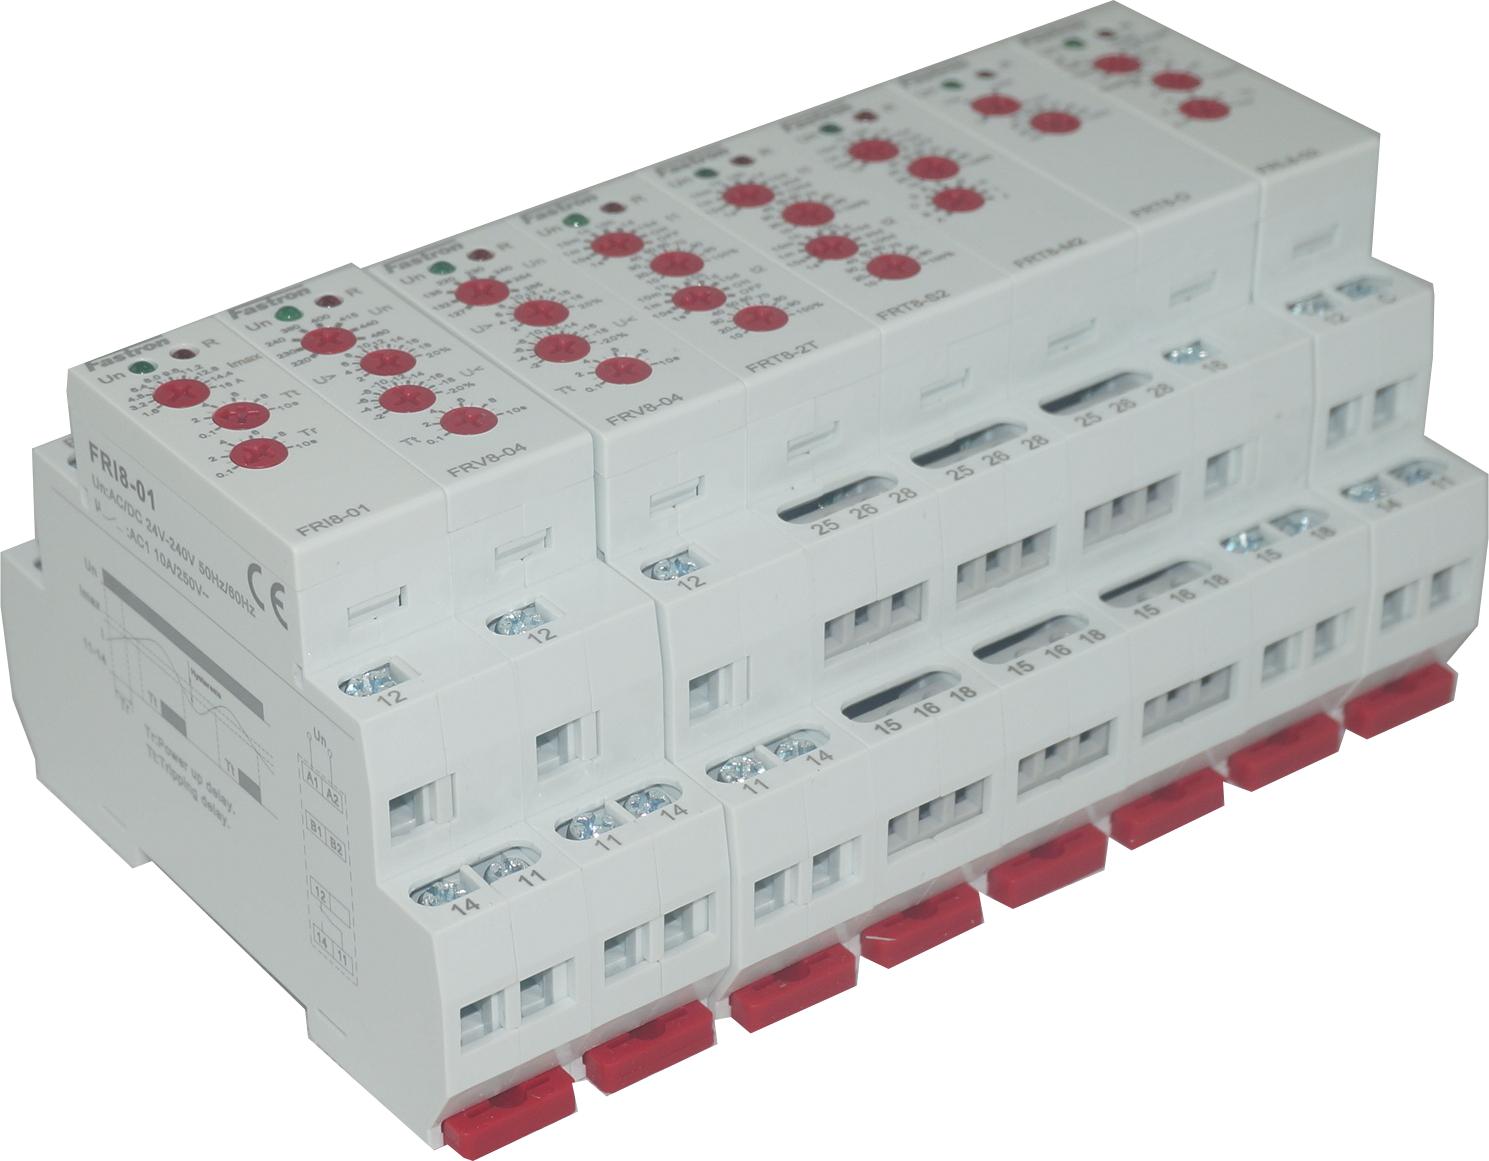 FRI 8-01/16, Current Monitoring Relay AC 1.6 - 16 A, Adjustable delay 0.5 - 10 s, Universal 24-240VAC 24VDC Aux Supply-Monitoring Relay-Fastron Electronics-Fastron Electronics Store